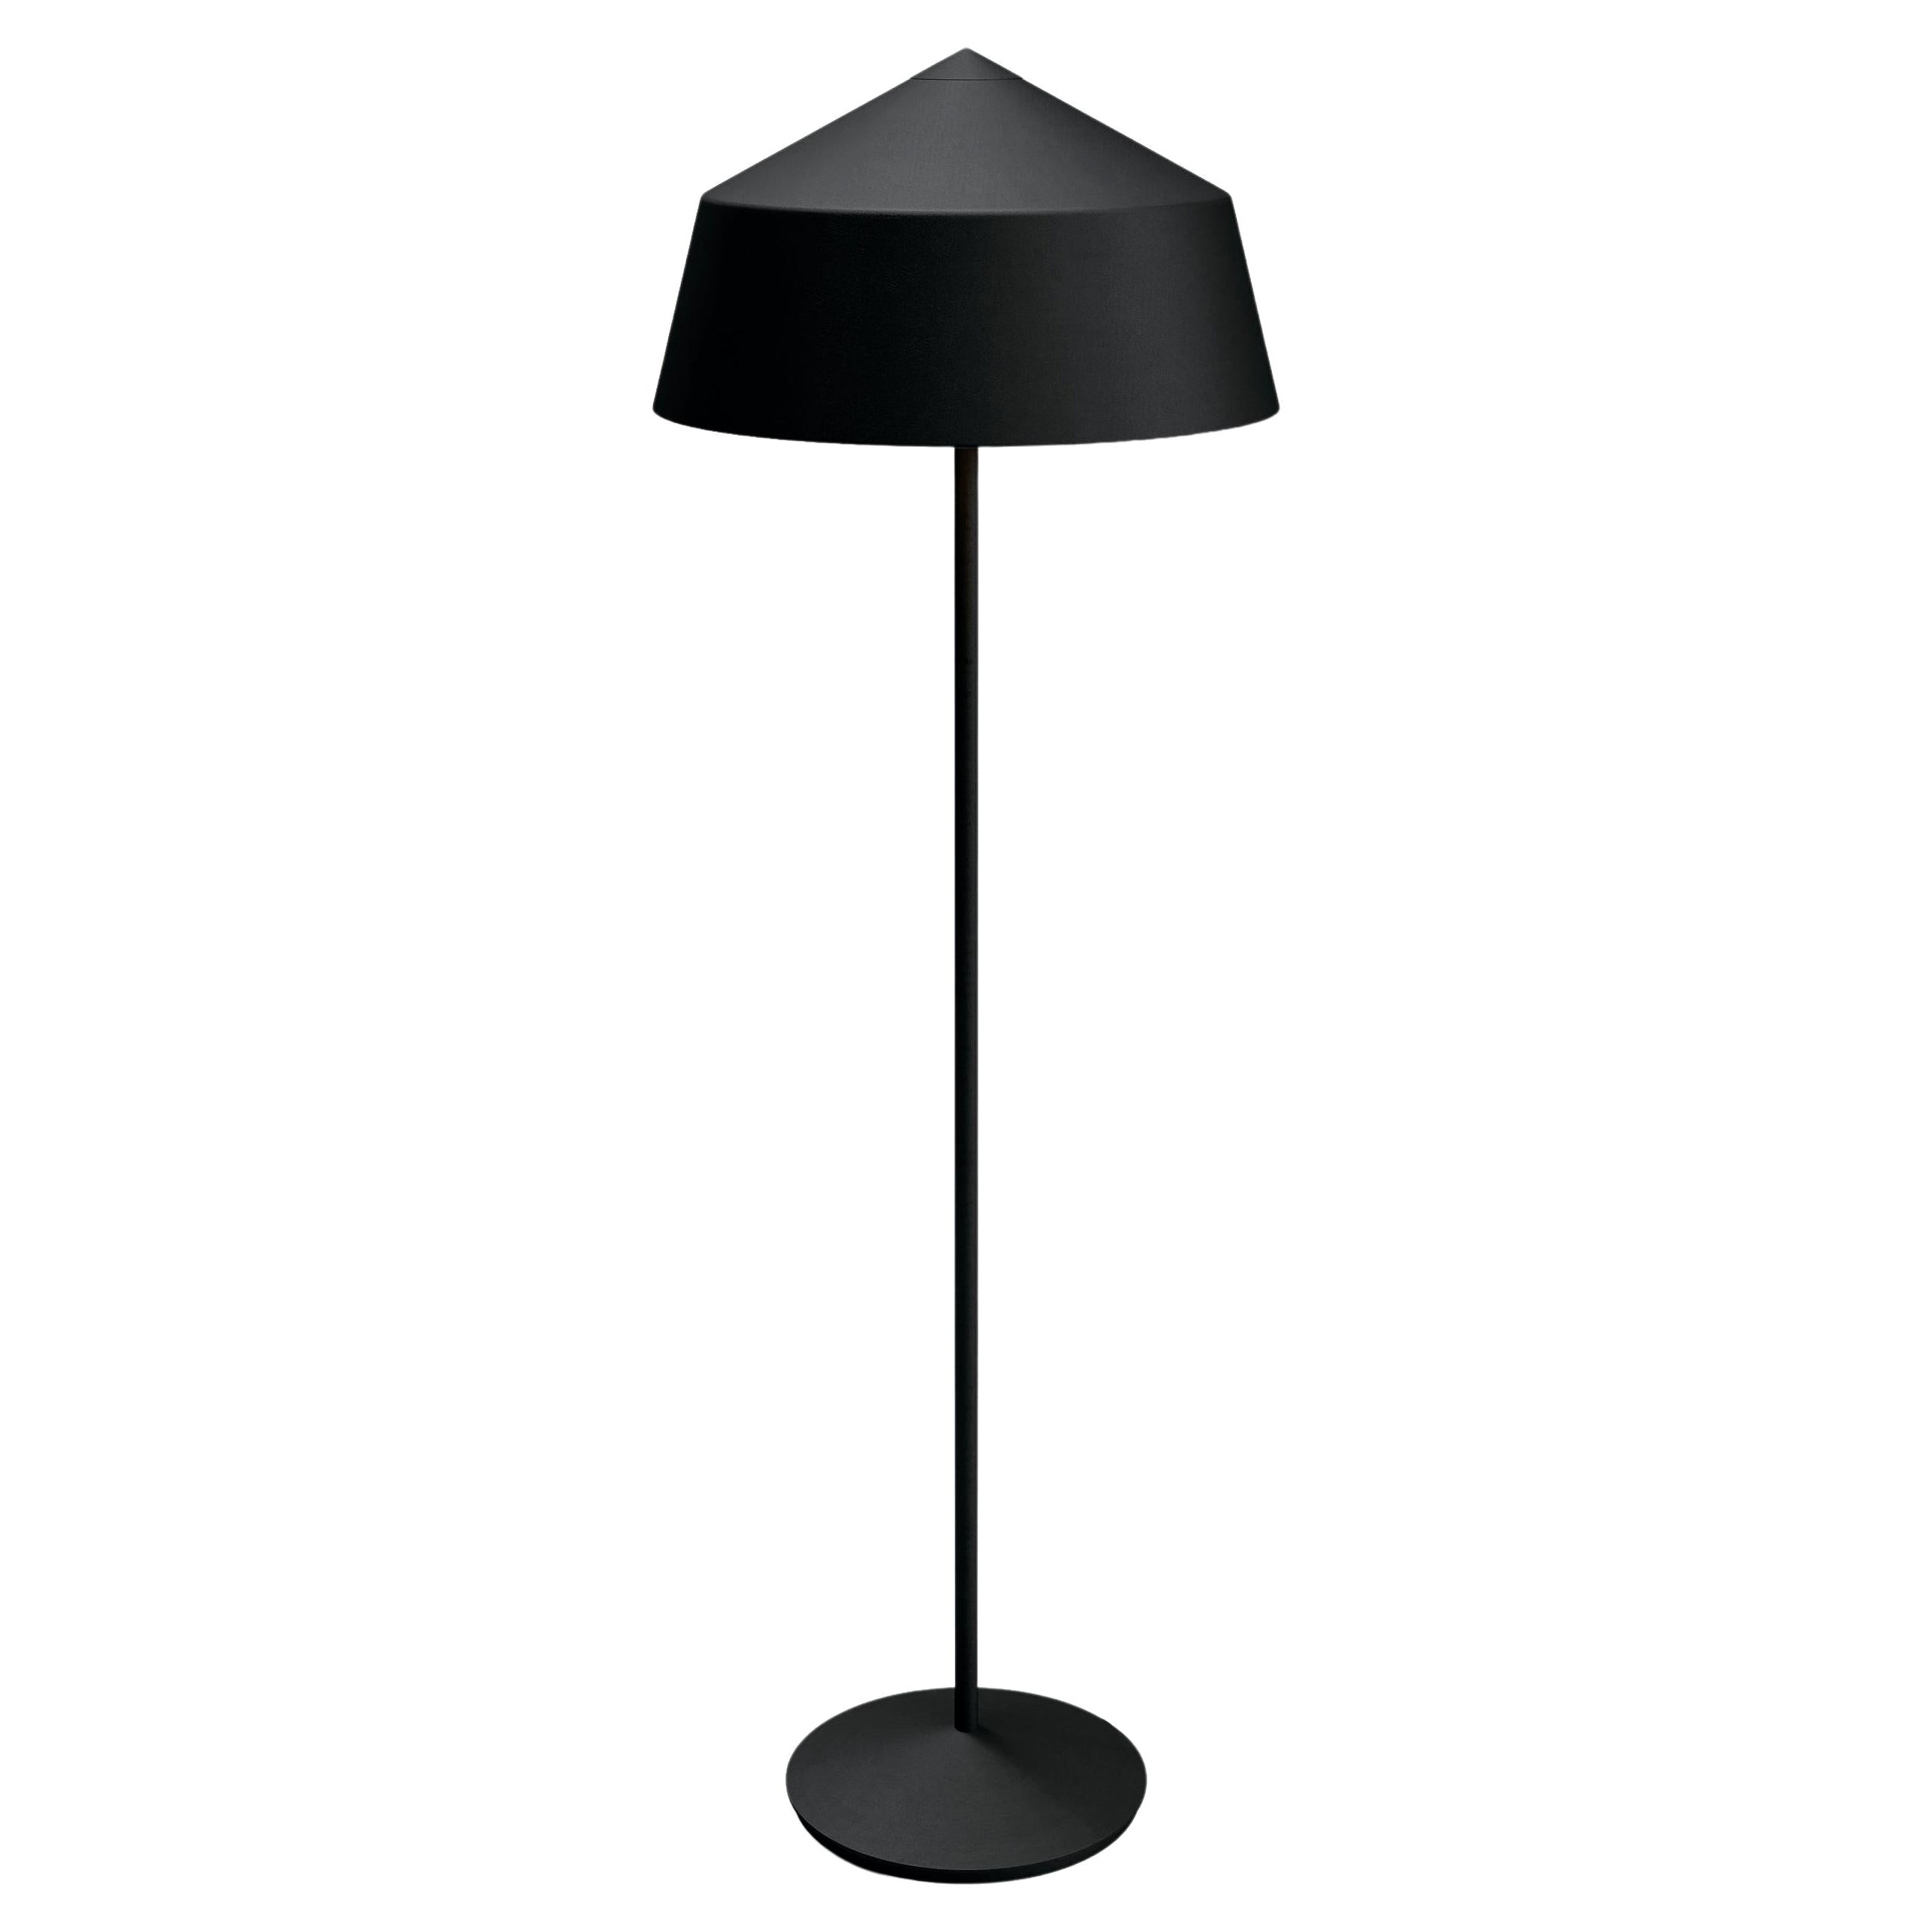 Circus Floor Lamp Designed by Corinna Warm for Warm Black/Bronze For Sale